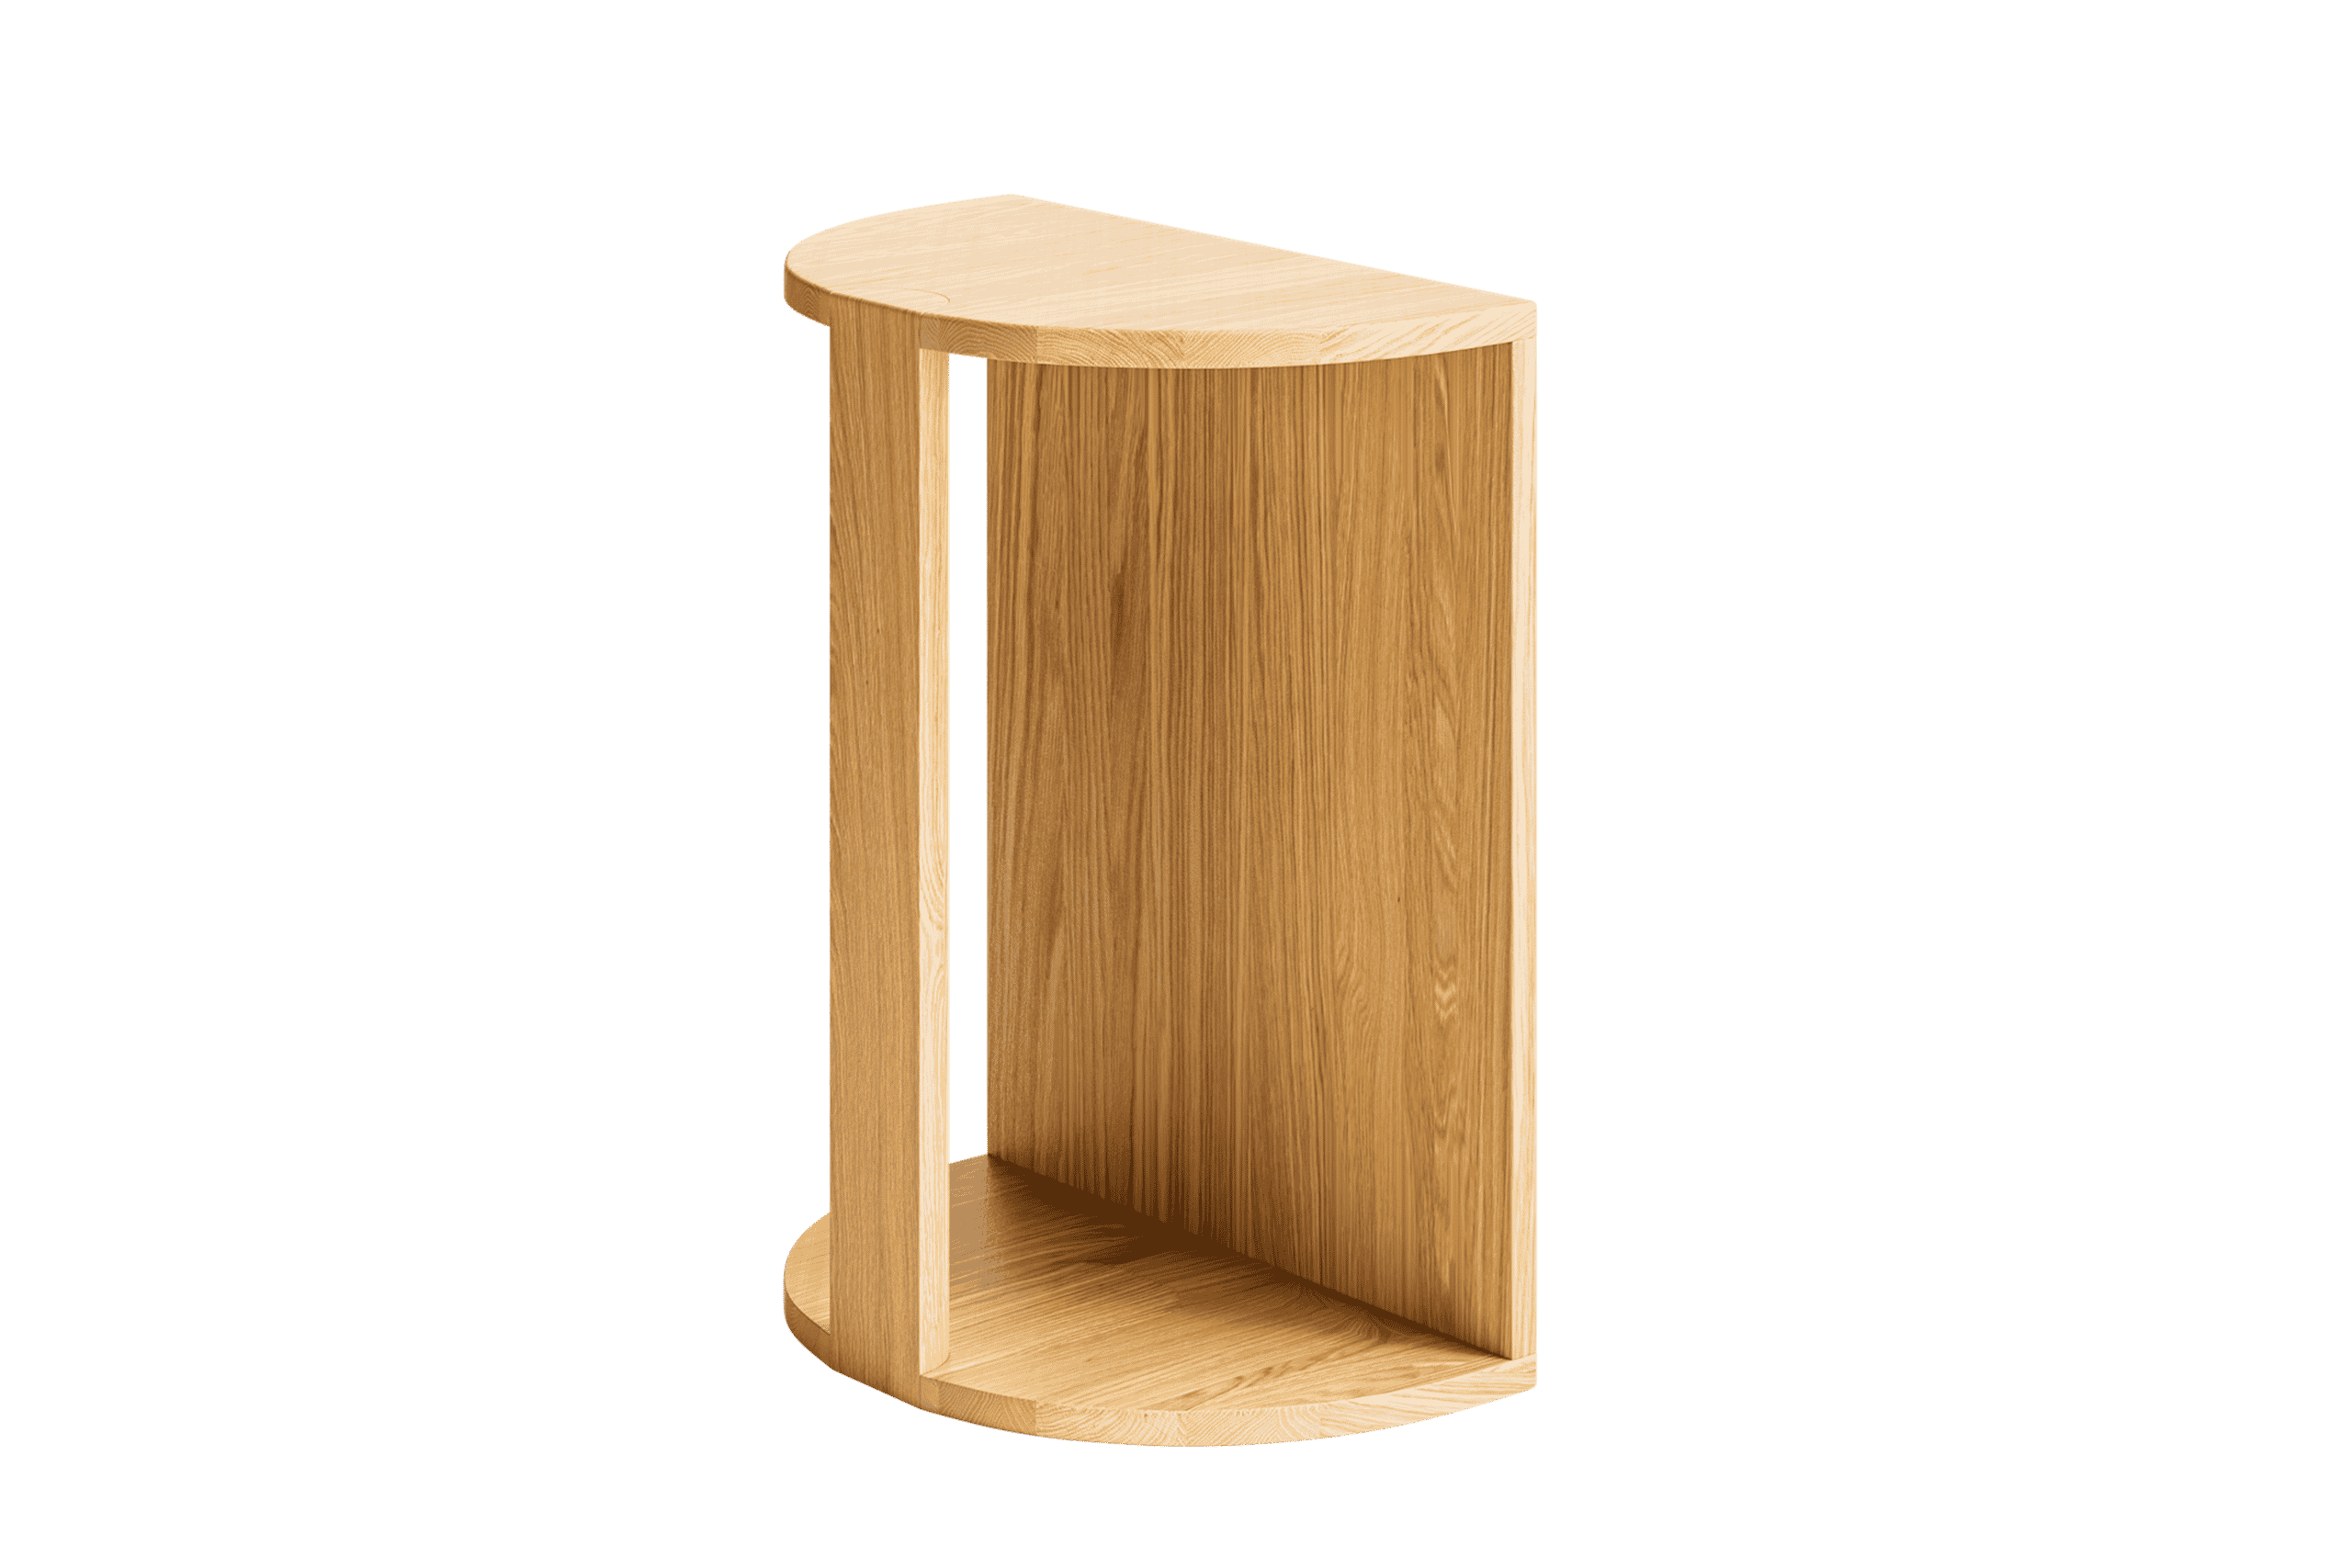 The Semi Side Table